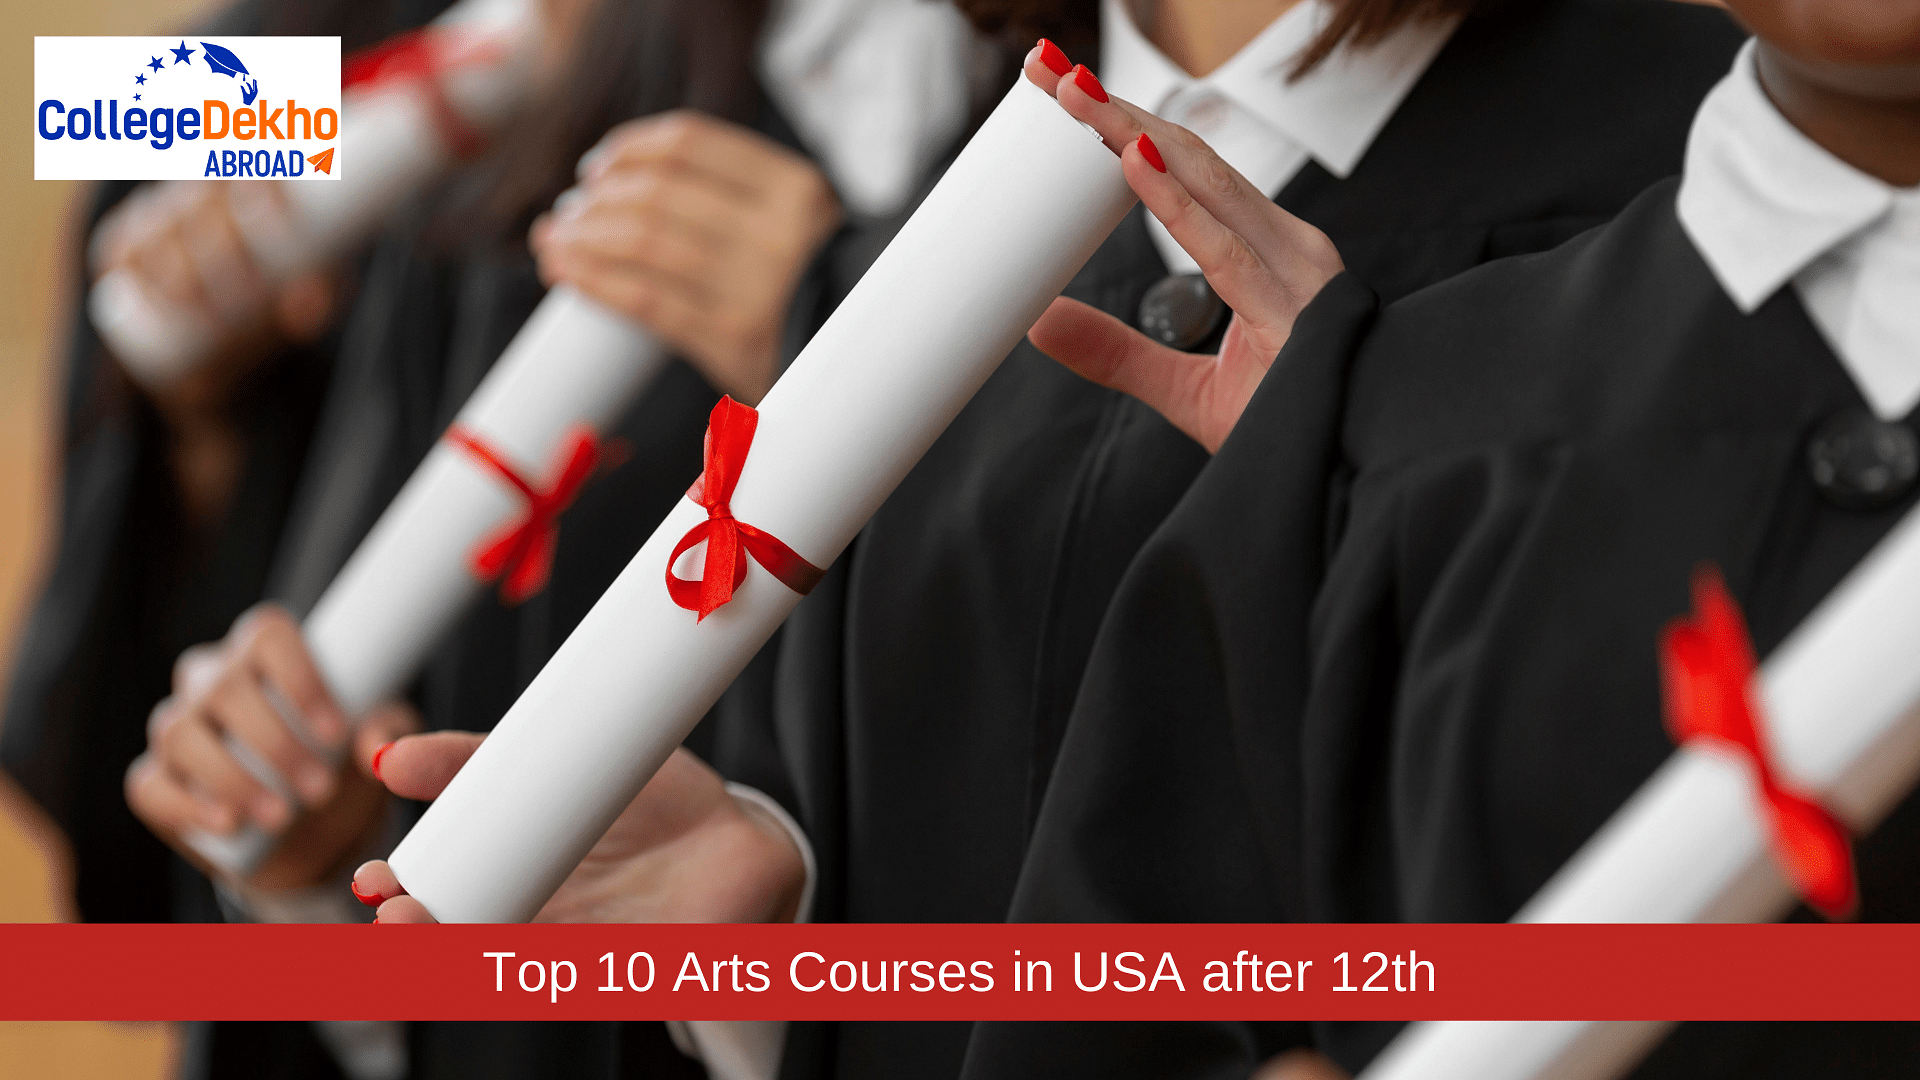 Top 10 Arts Courses in USA after 12th